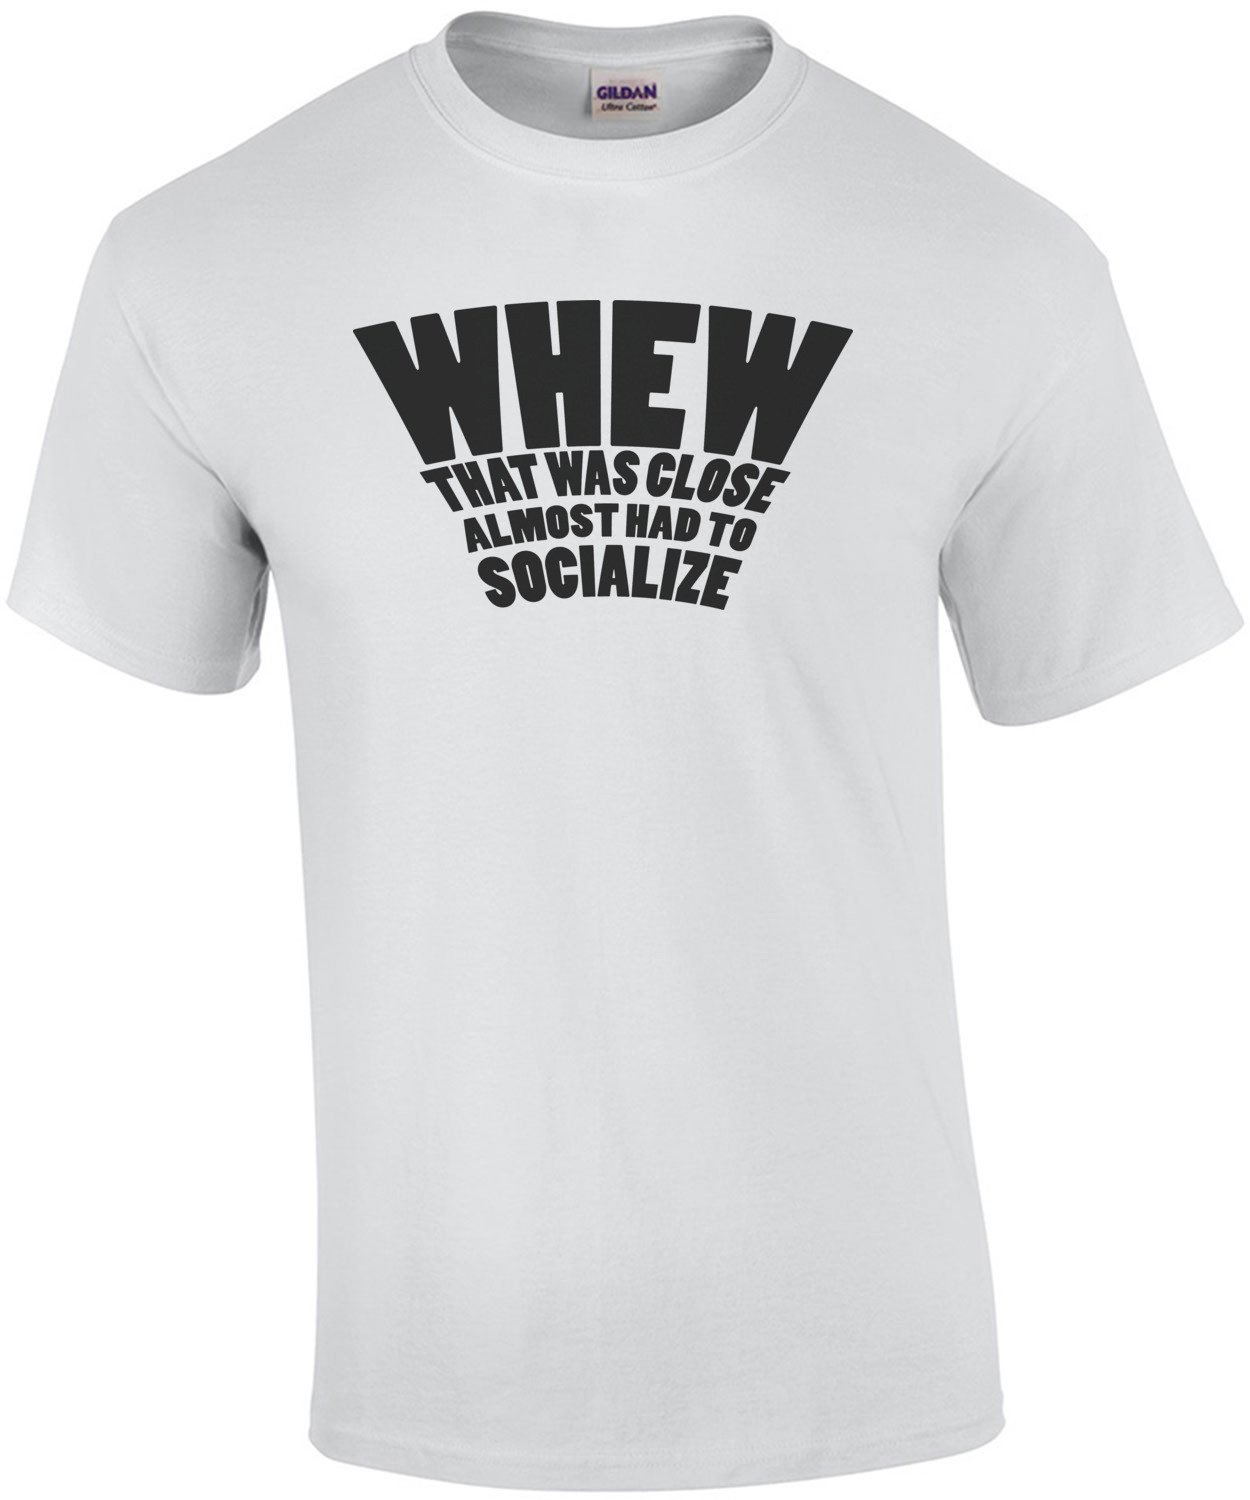 WHEW That was close almost had to socialize sarcasm t-shirt